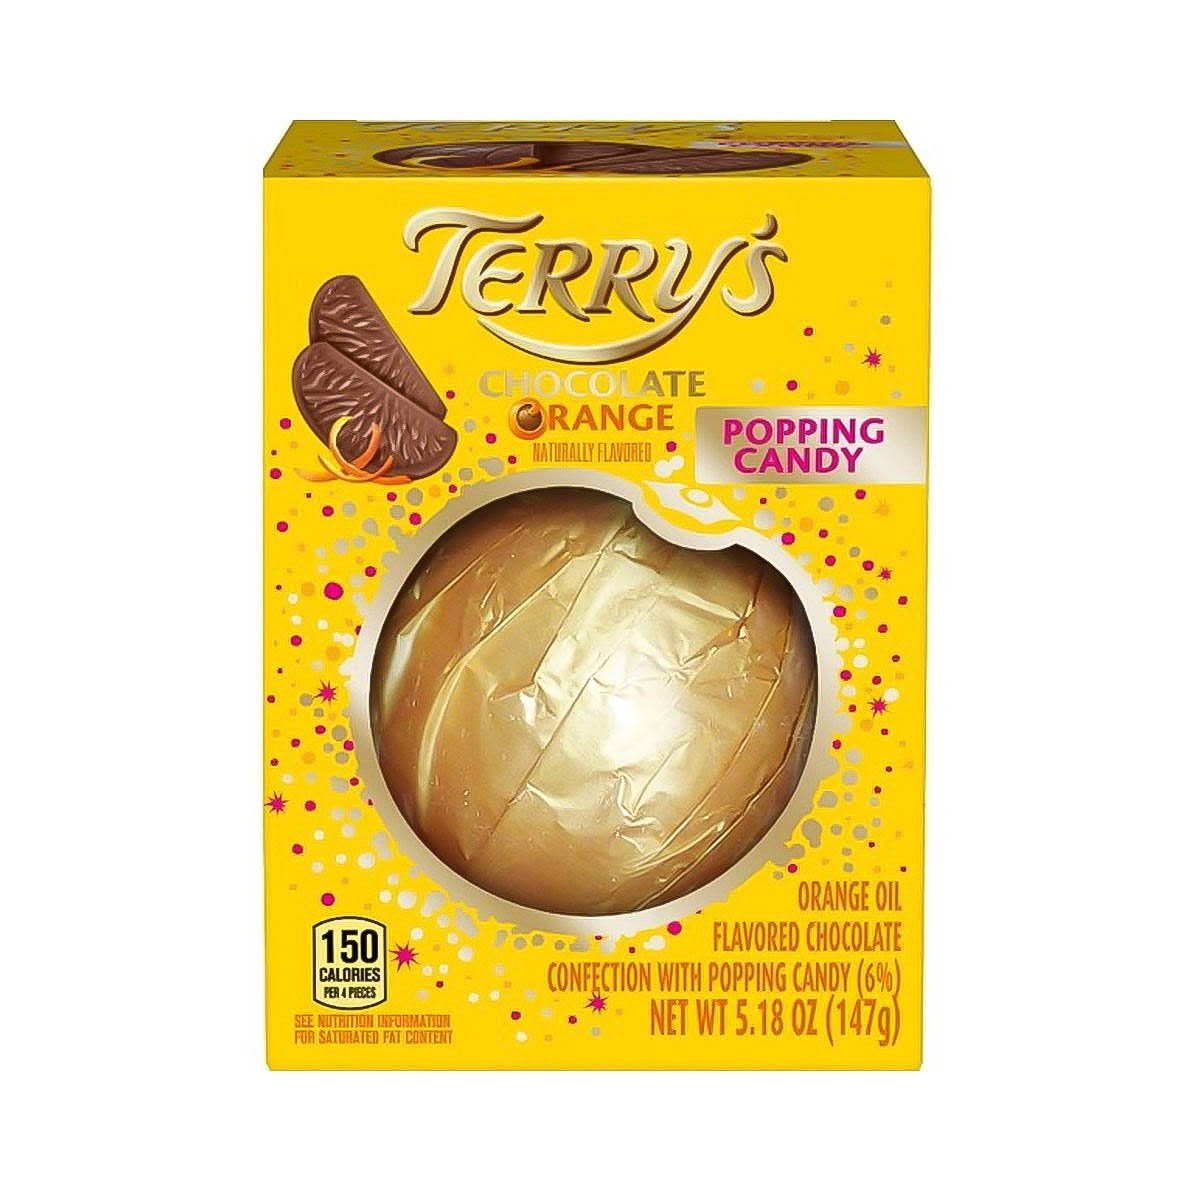 Terry's Popping Candy Chocolate Orange, Orange flavored confection with popping candy 5.18oz